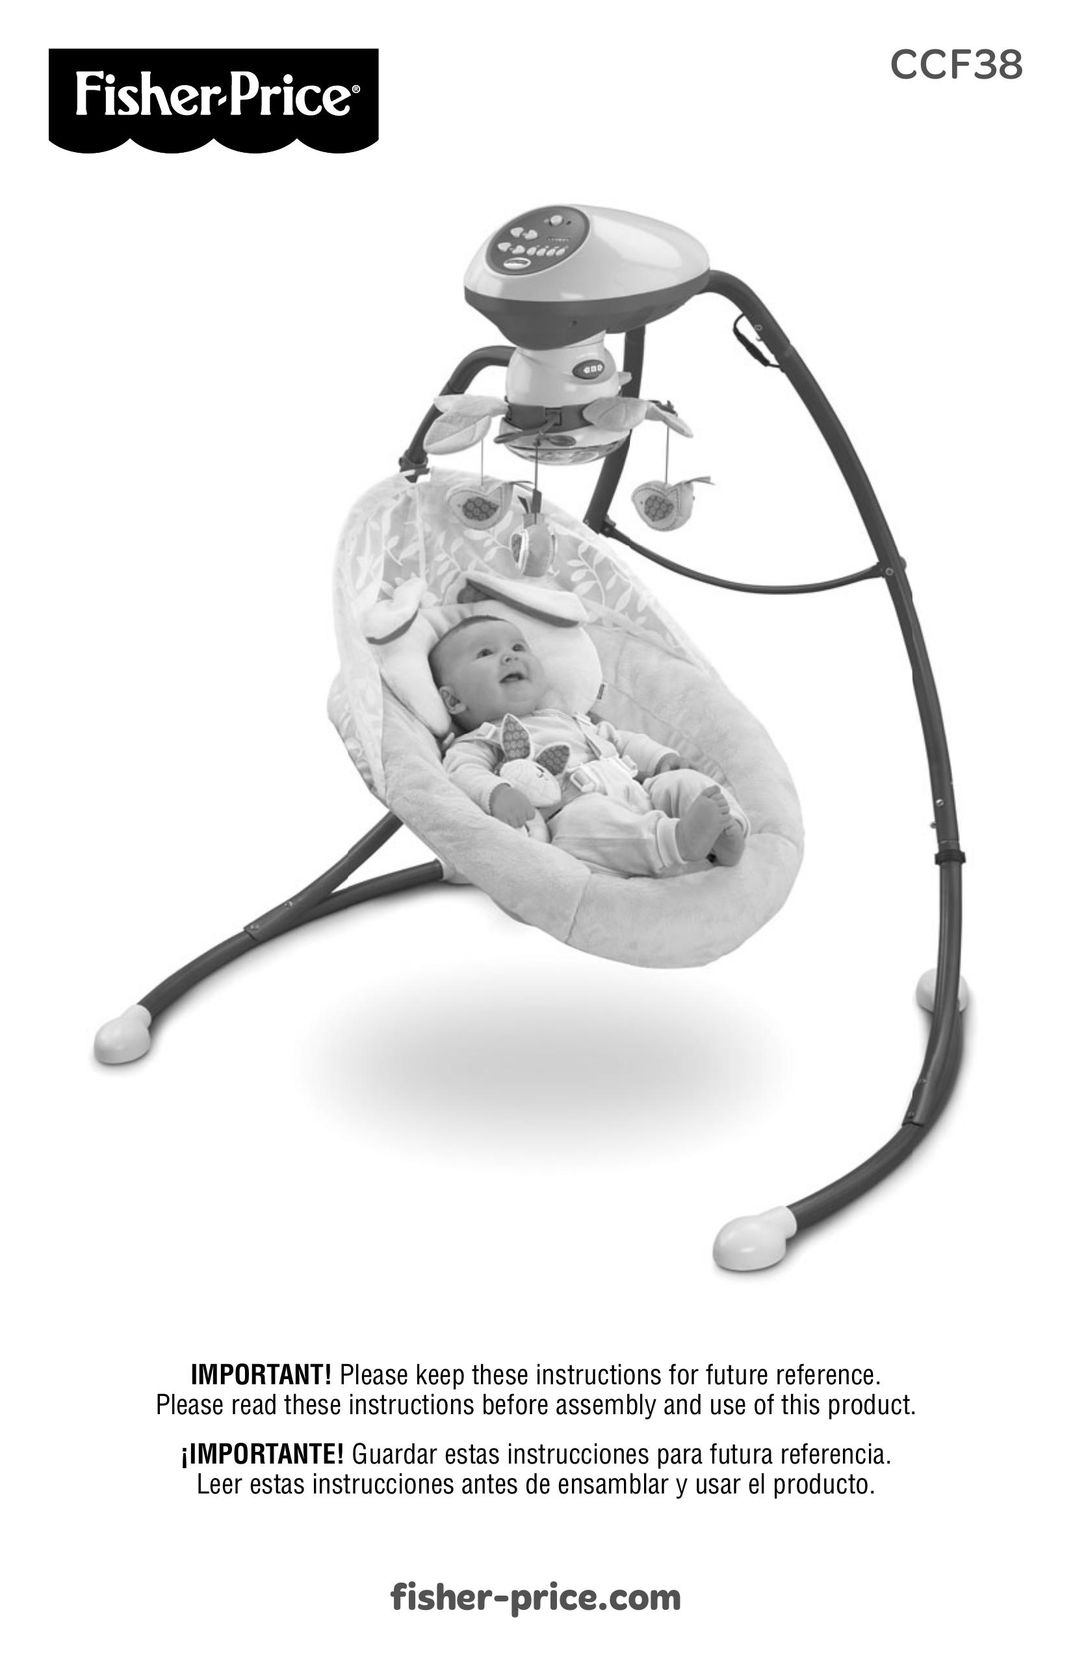 Fisher-Price CCF38 Baby Swing User Manual